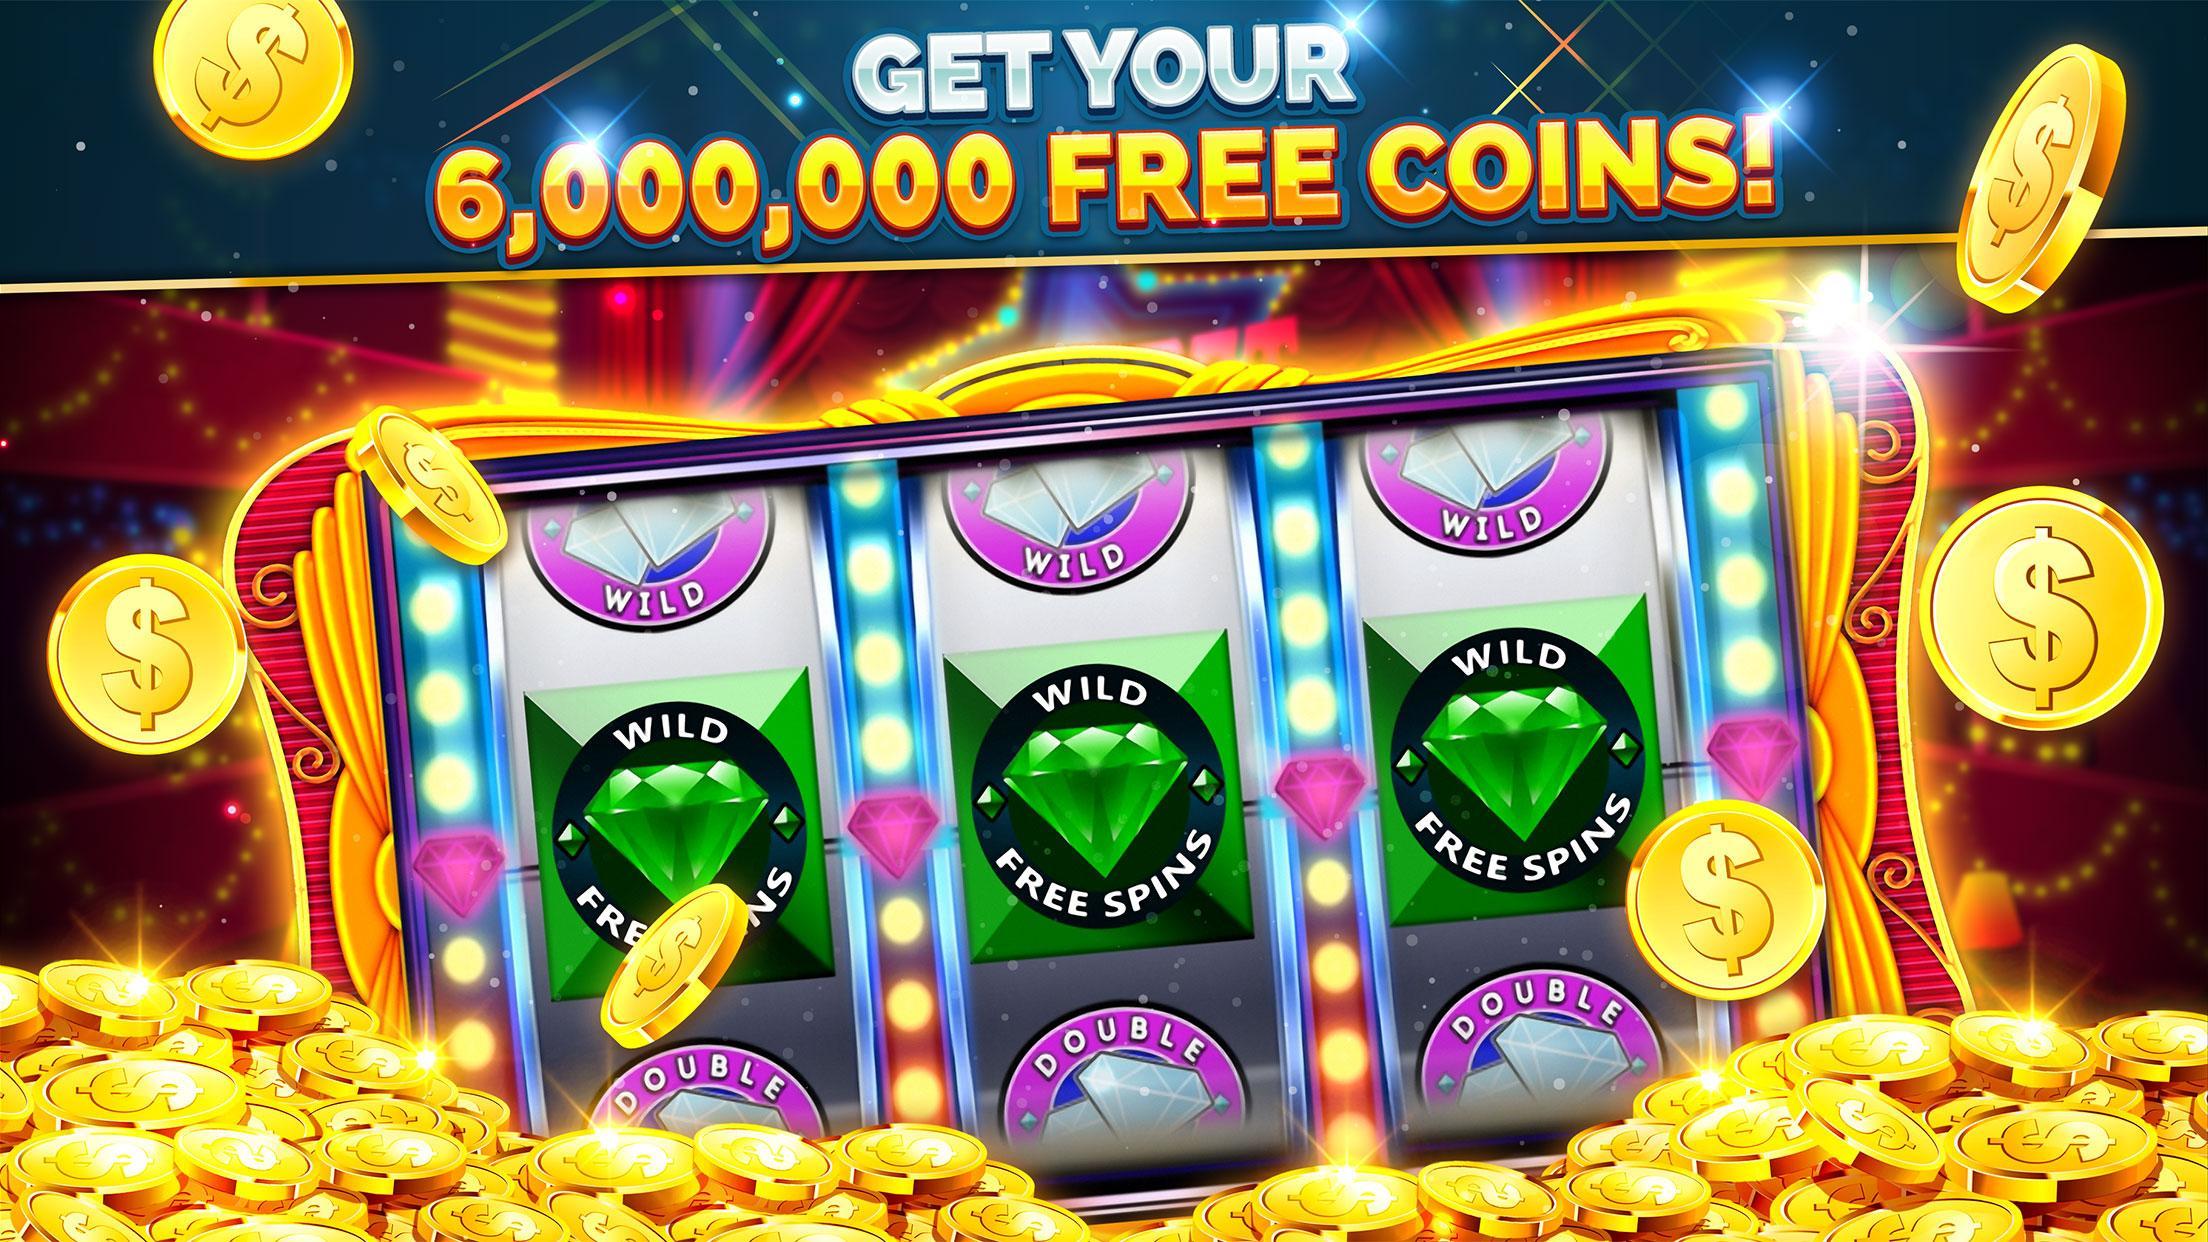 Play Slots Games Online For Free